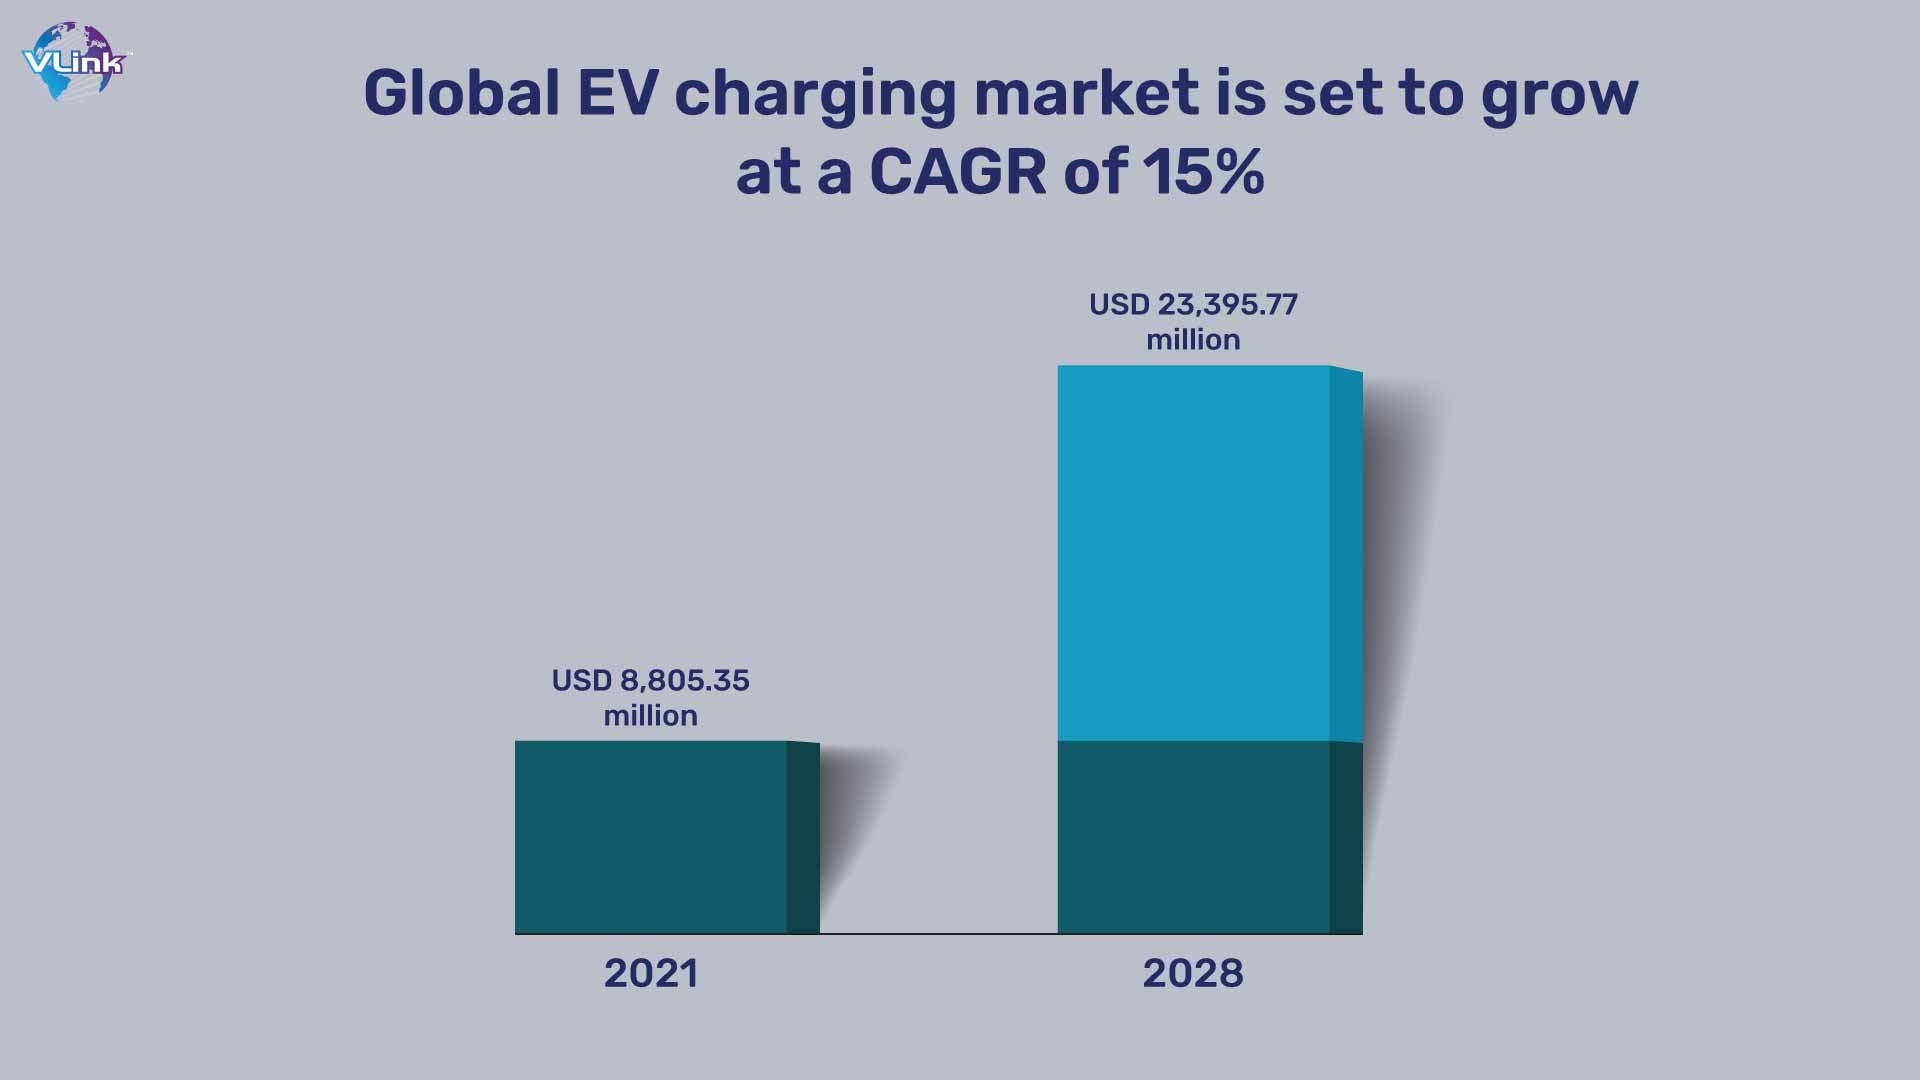 Global EV charging market is set to grow at a CAGR of 15%